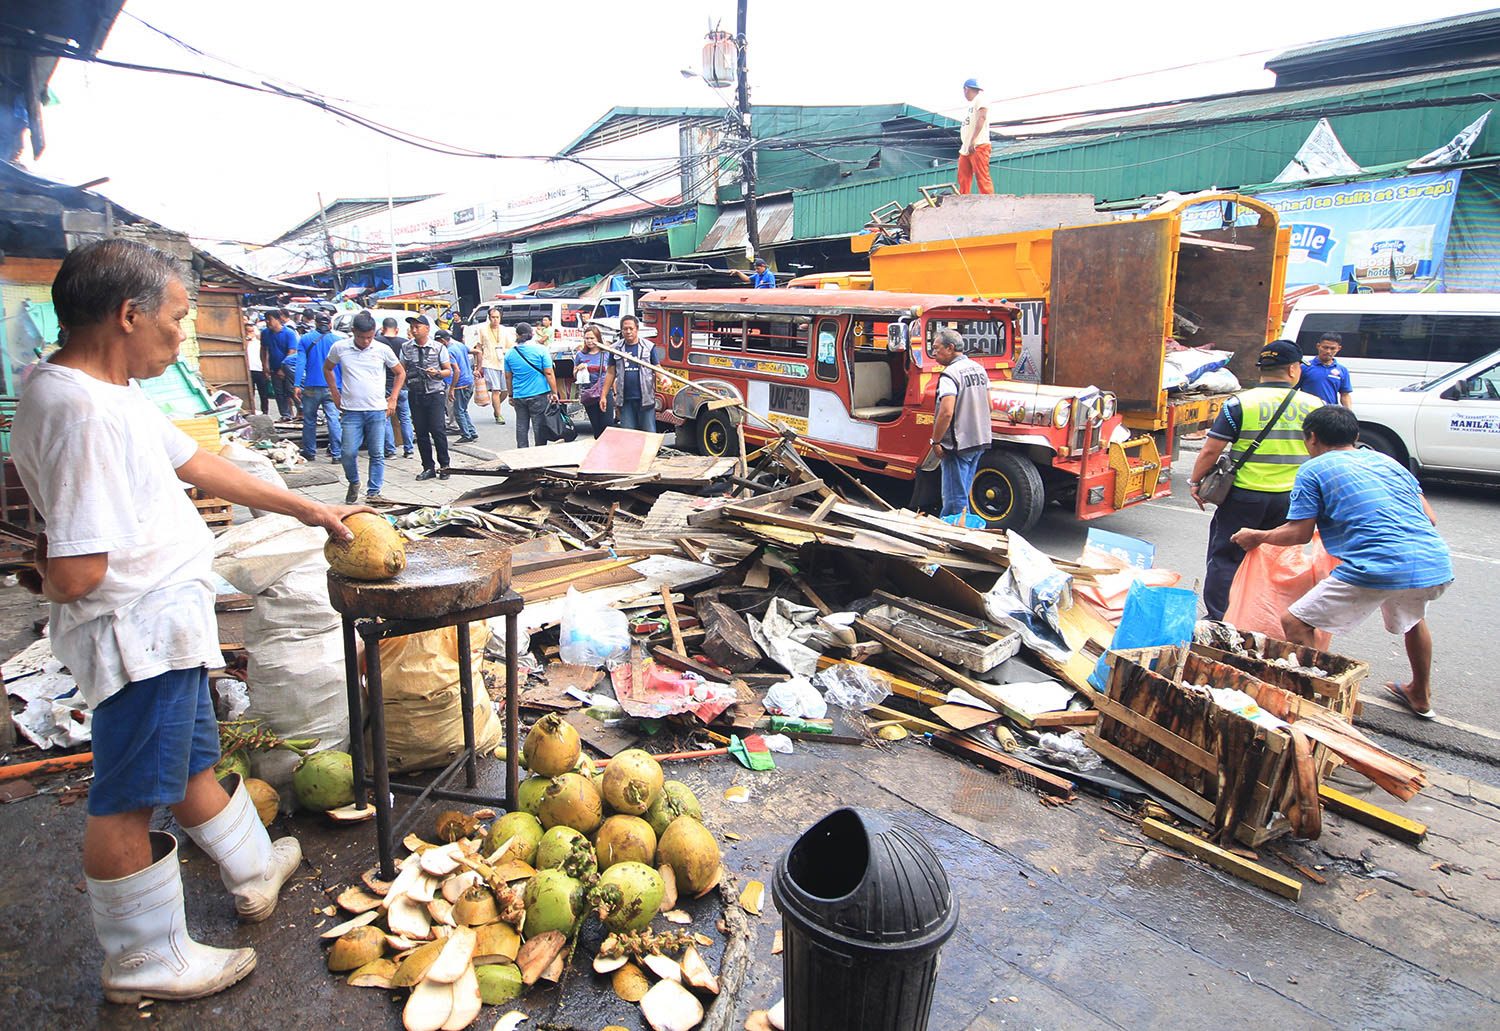 DILG won’t make list of underperforming mayors, barangay chiefs in road clearing